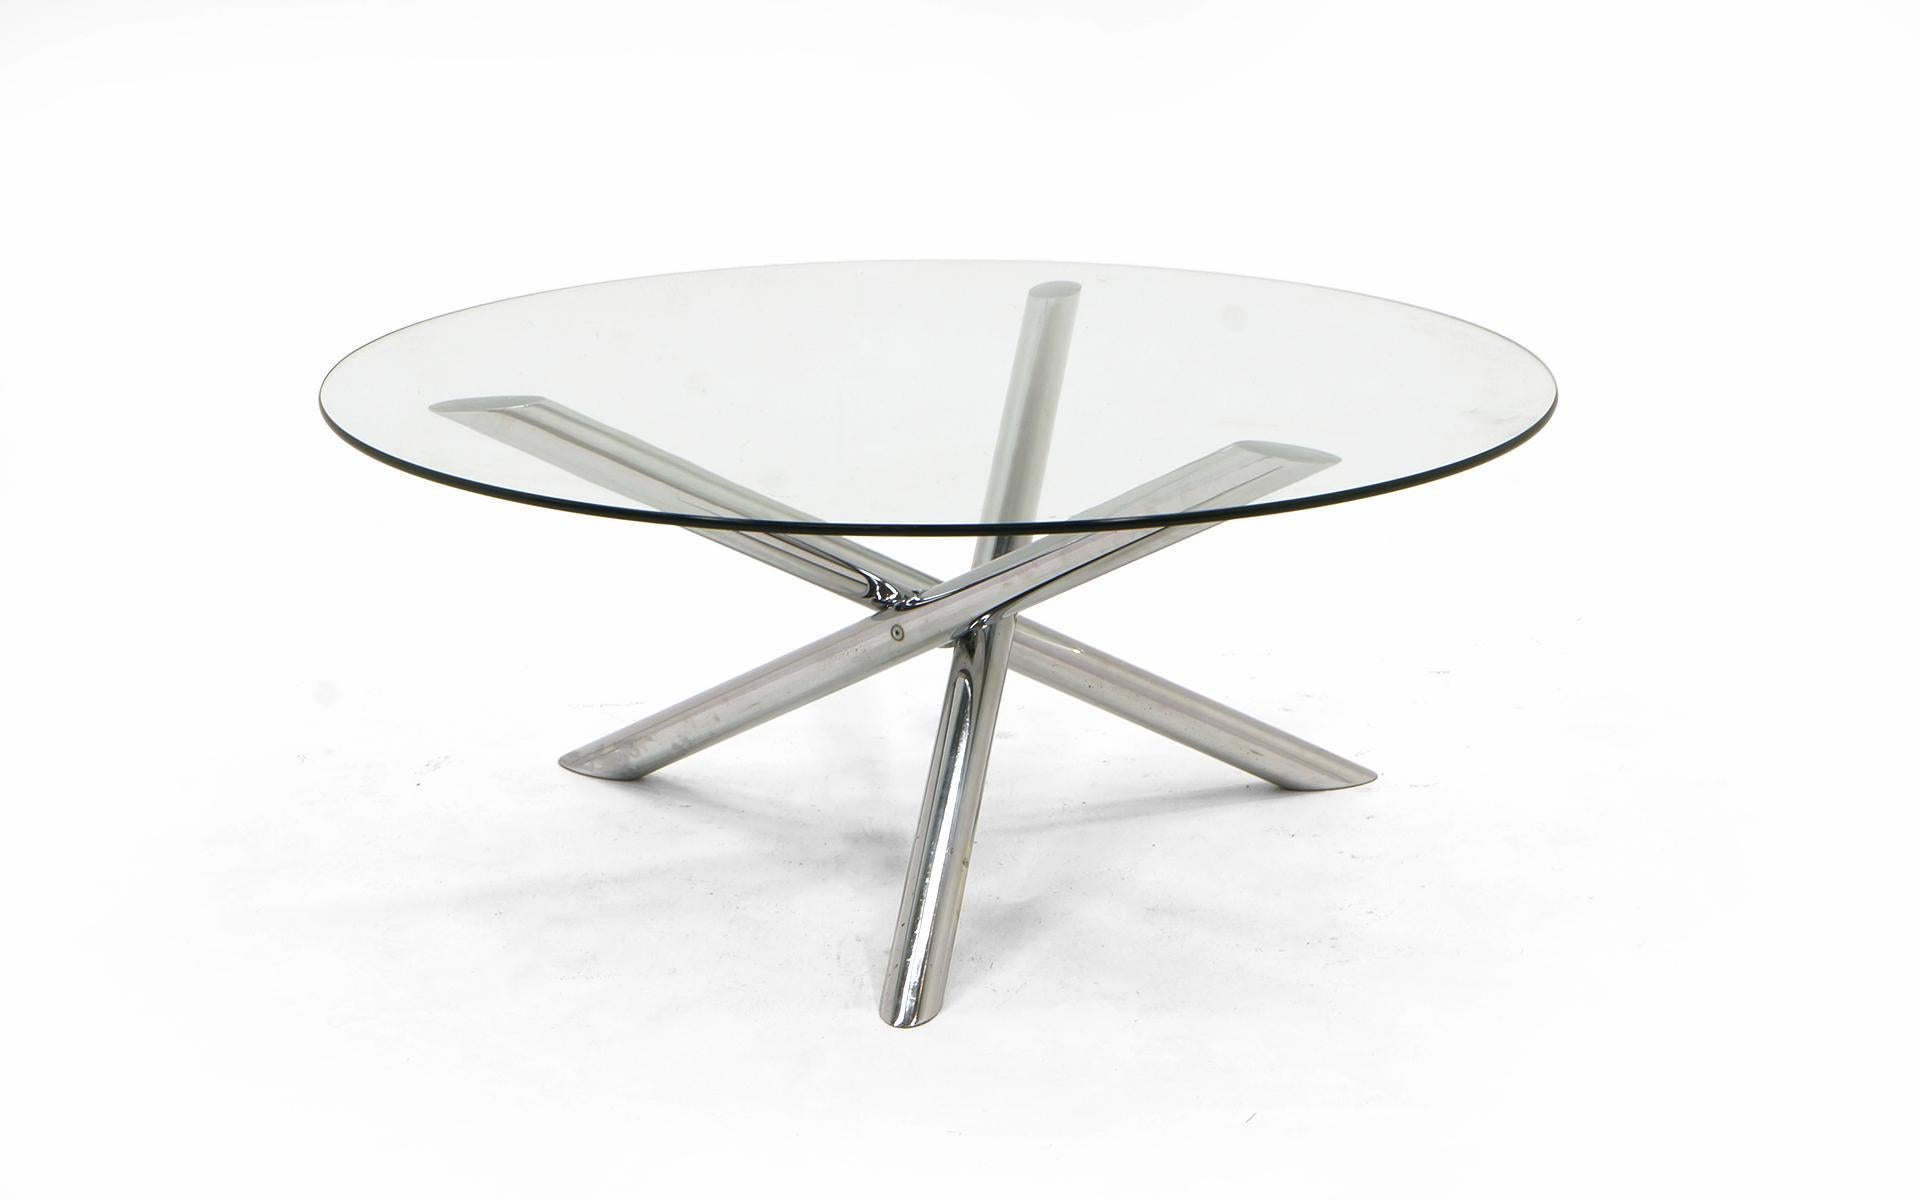 Round coffee table with a Jax style chrome base and glass top. Designer unknown.